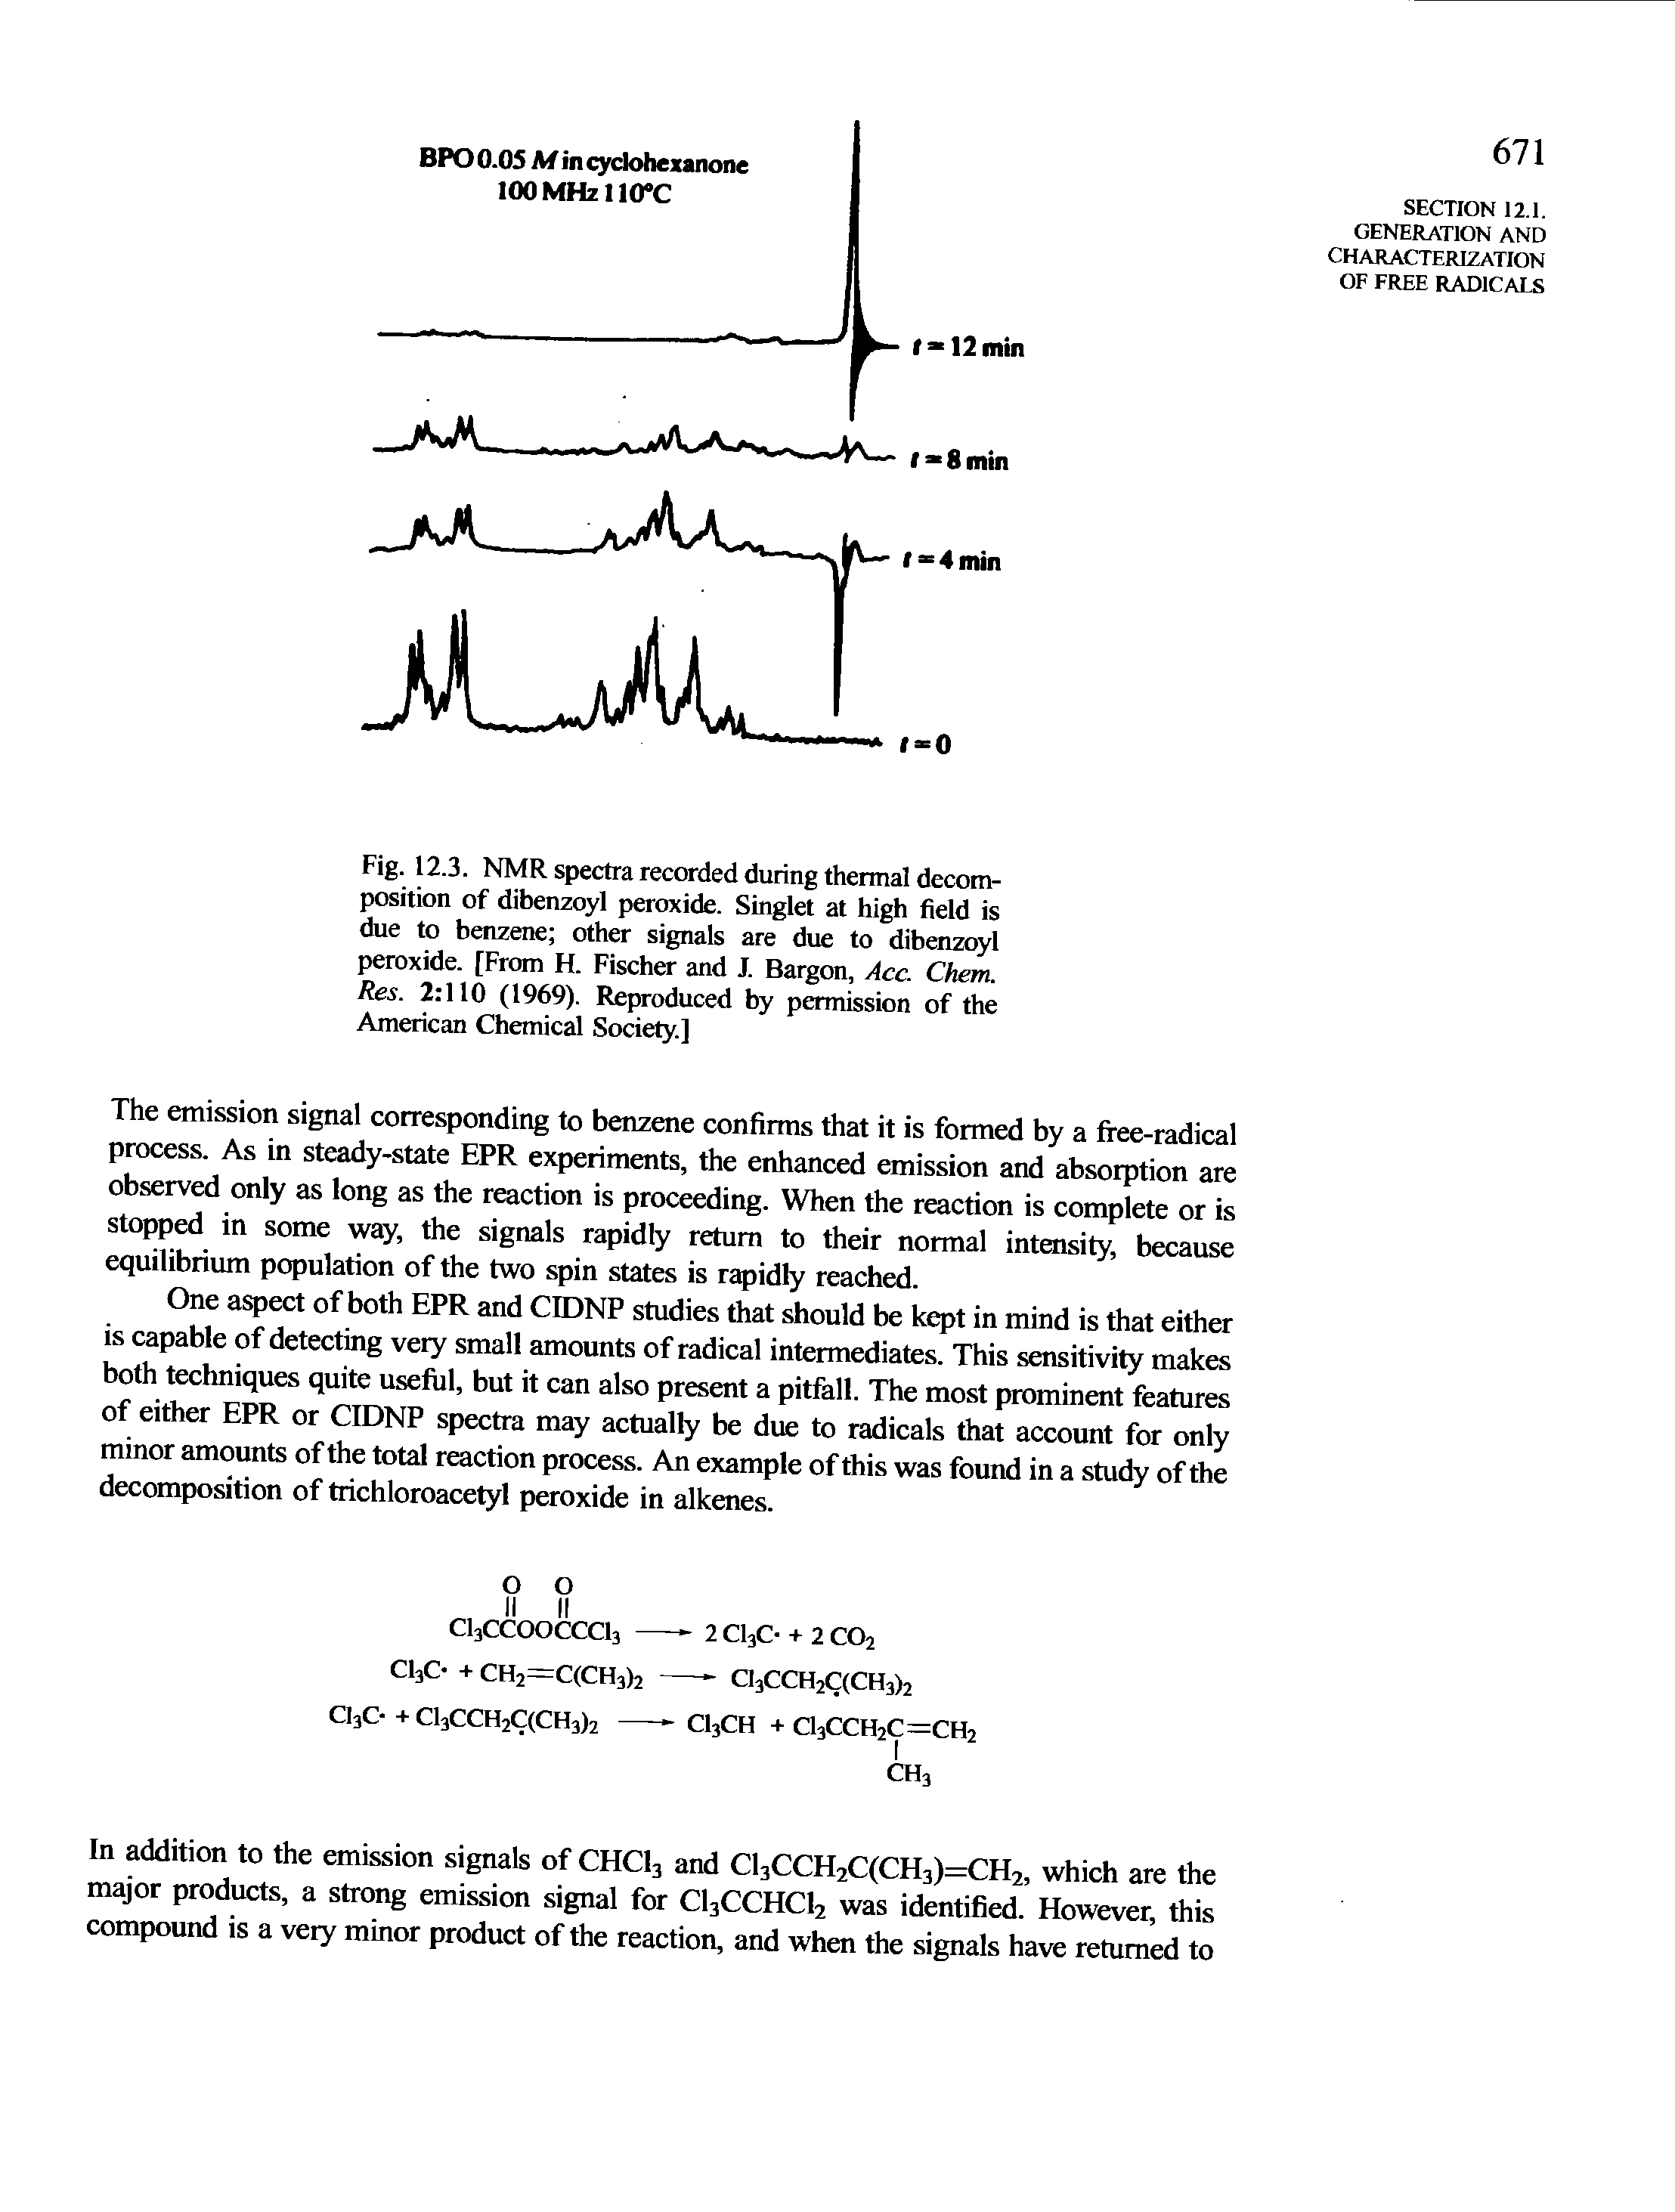 Fig. 12.3. NMR spectra recorded during thermal decomposition of dibenzoyl peroxide. Singlet at high field is due to benzene other signals are due to dibenzoyl peroxide. [From H. Fischer and J. Bargon, Acc. Chem. Res. 2 110 (1969). Reproduced by permission of the American Chemical Society.]...